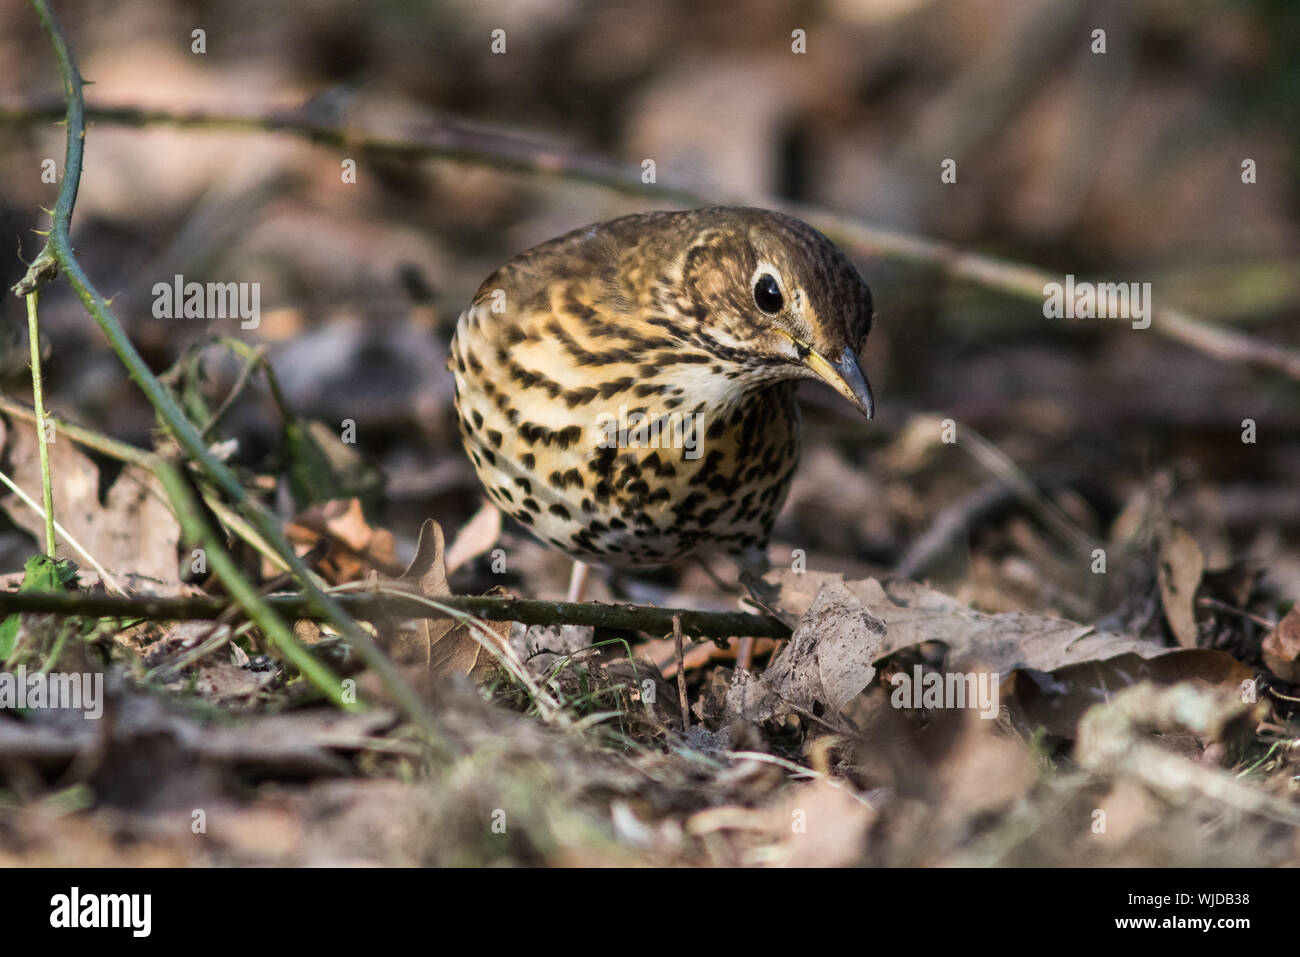 Song thrush, Turdus philomelos, foraging amongst leaves. Stock Photo